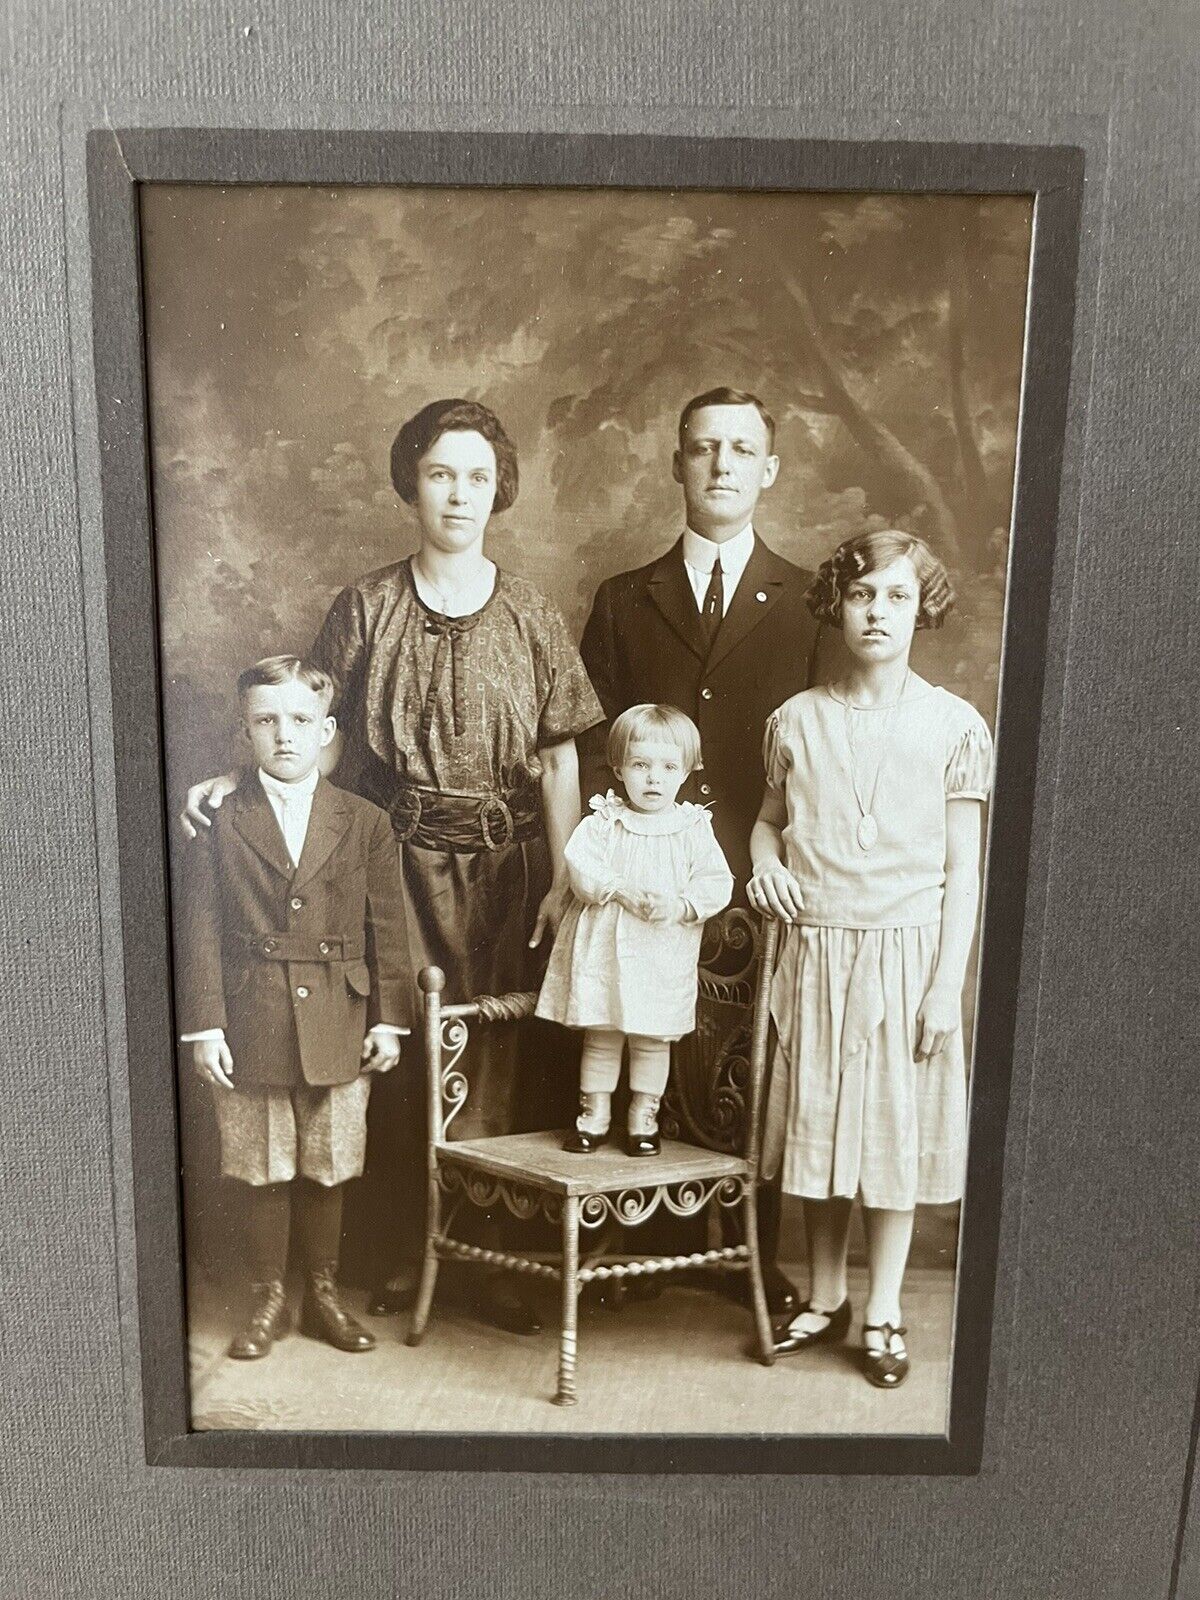 VTG ANTIQUE FORMAL PHOTOGRAPH OF 5-PERSON FAMILY ATTACHED TO CARDBOARD FOLDER